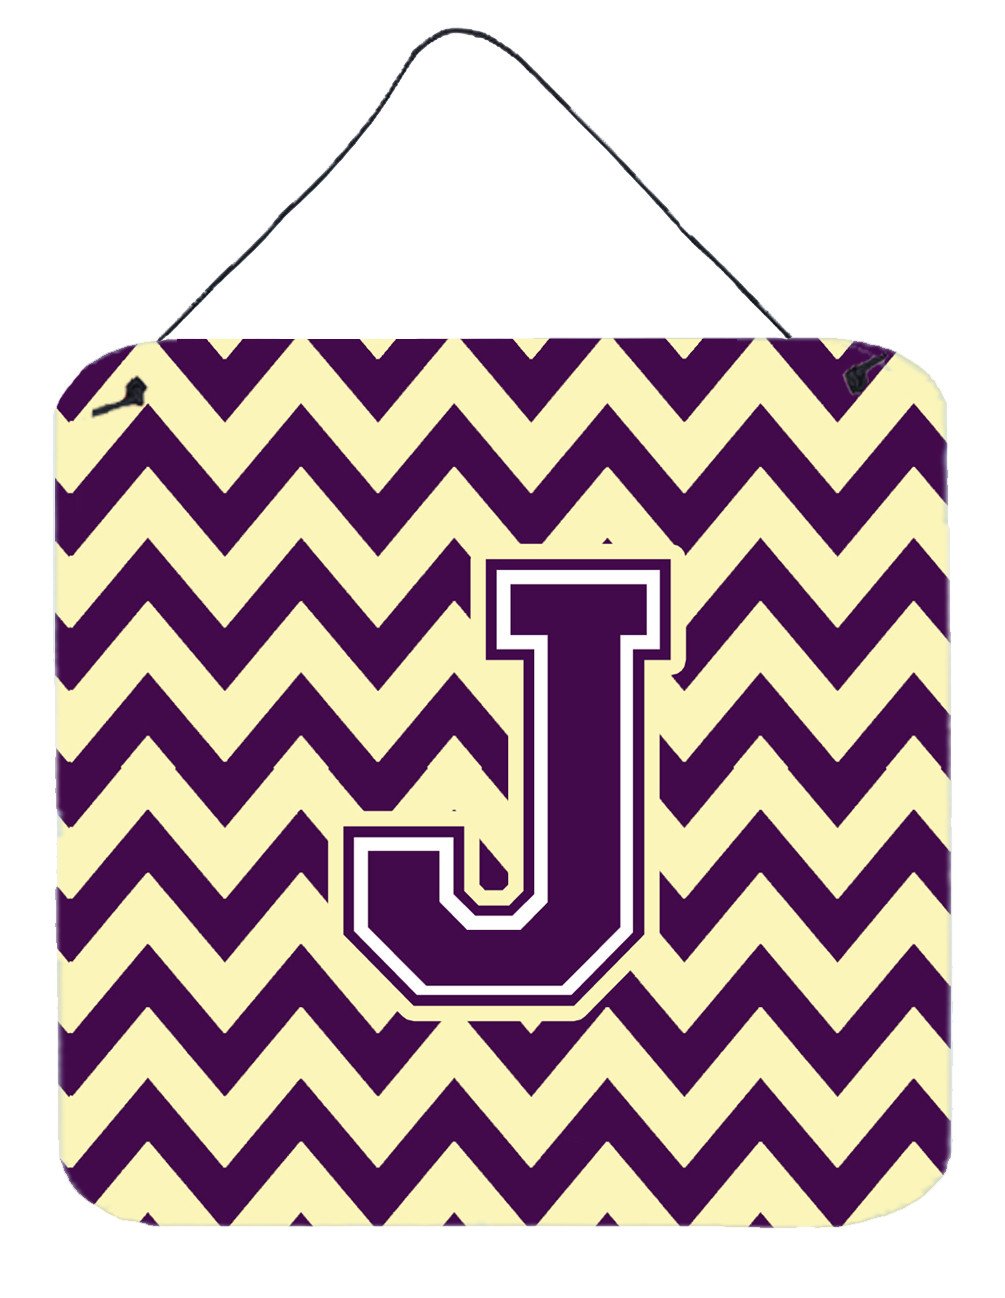 Letter J Chevron Purple and Gold Wall or Door Hanging Prints CJ1058-JDS66 by Caroline's Treasures